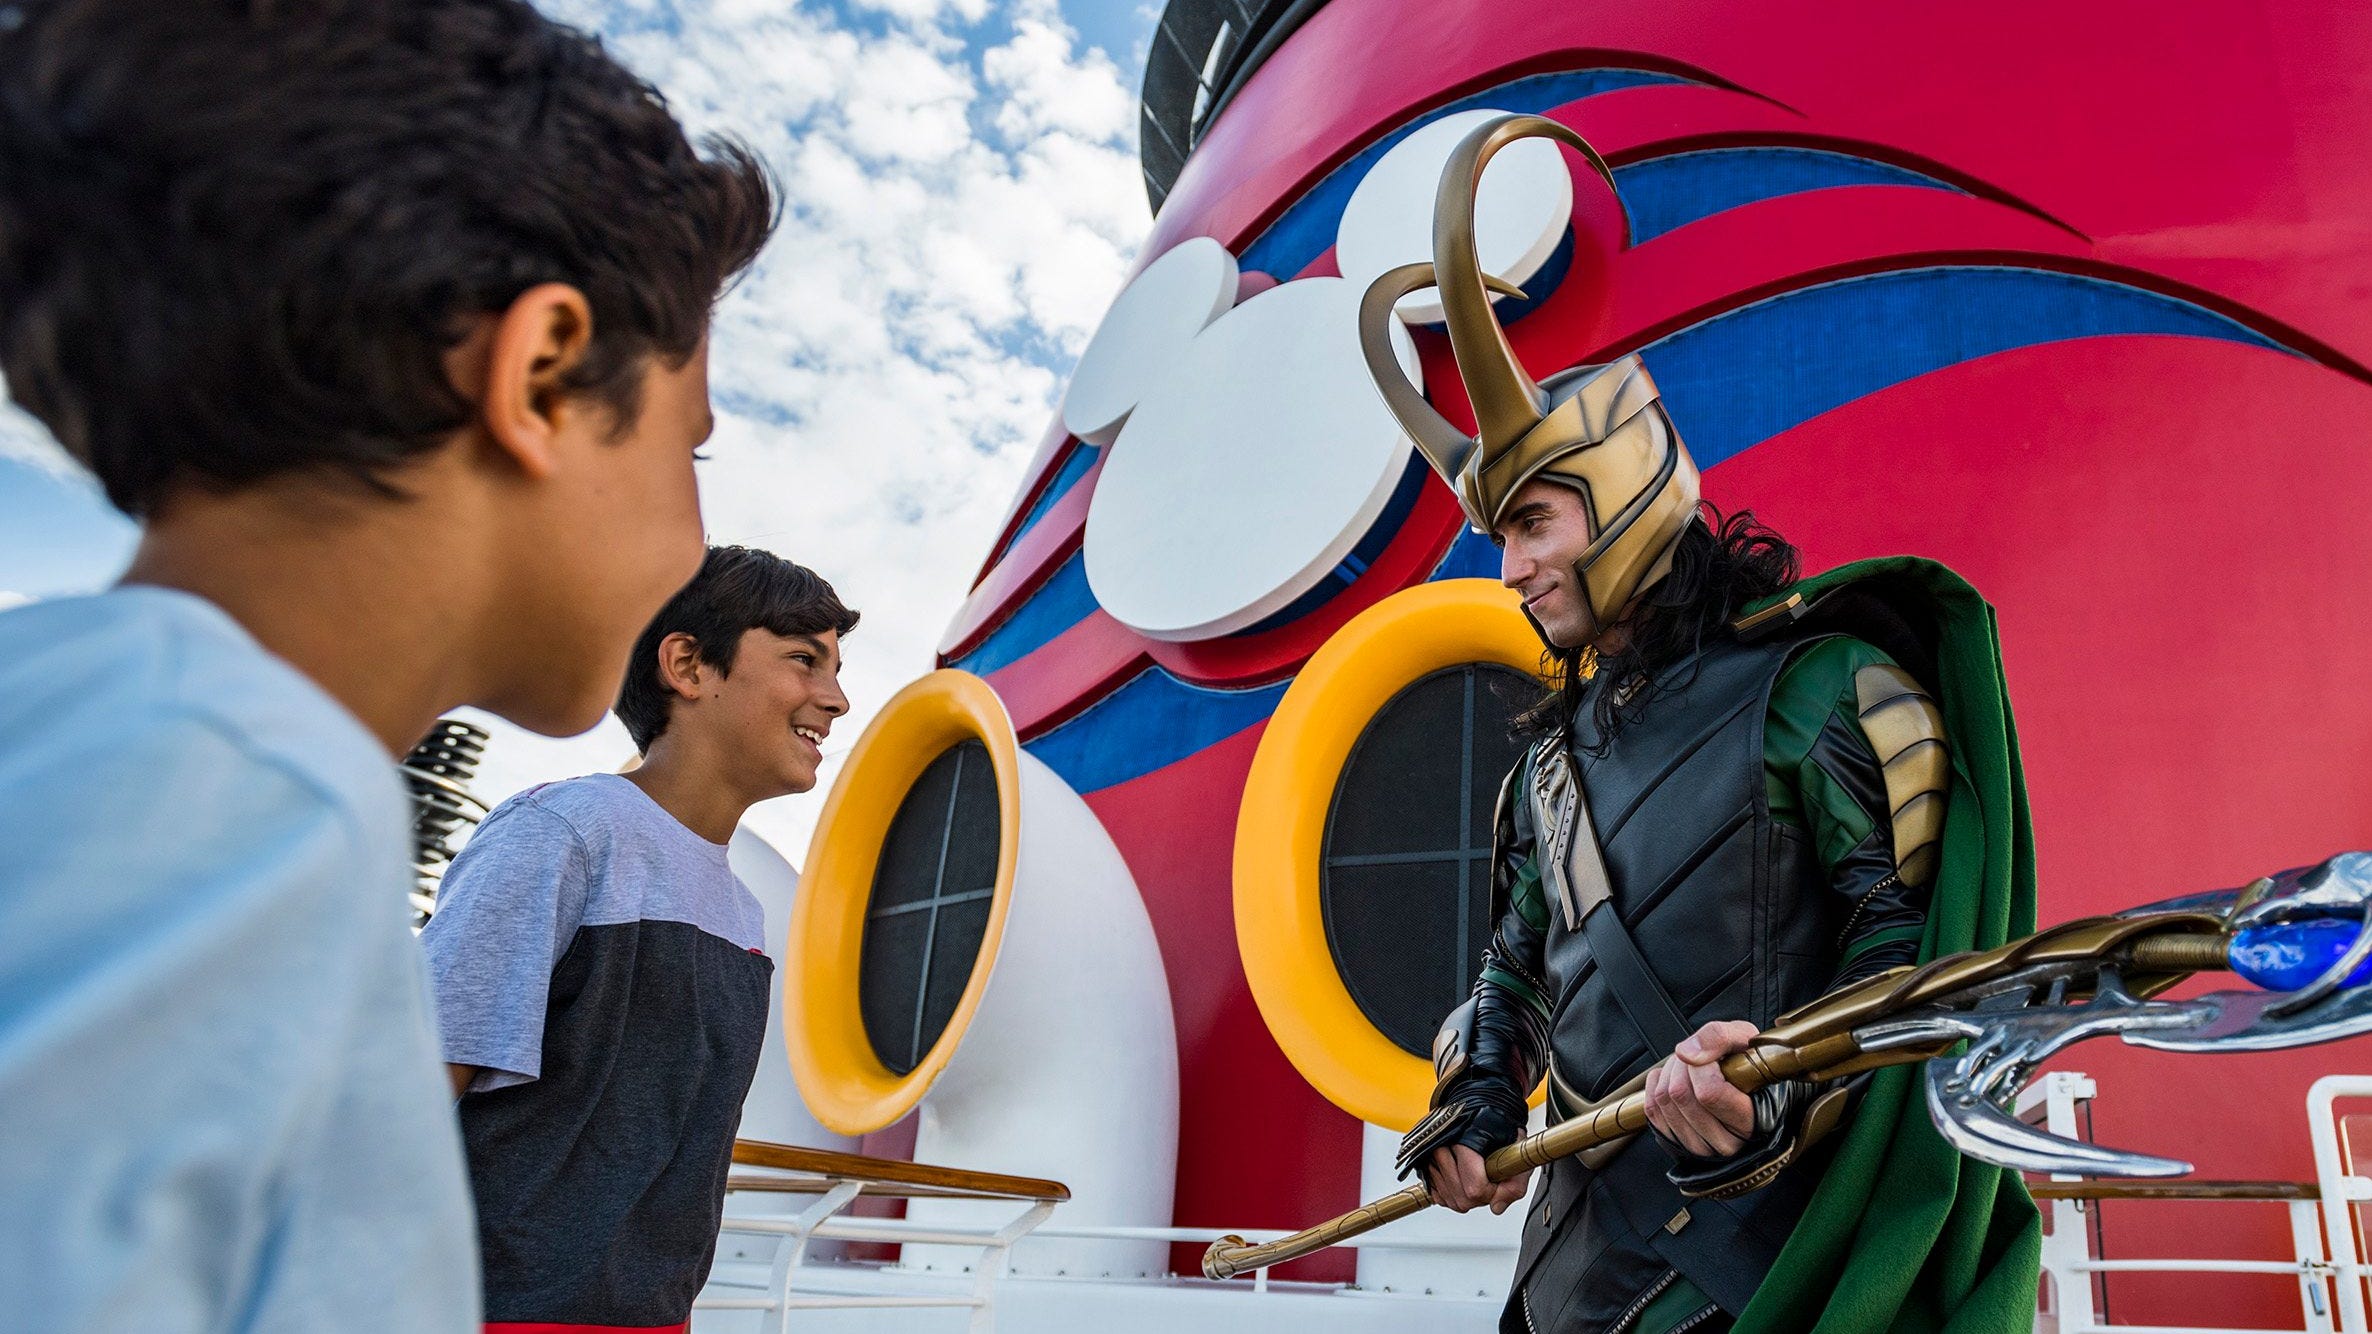 marvel-day-at-sea-returns-with-more-superheroes-villains-than-ever-on-disney-cruise-line